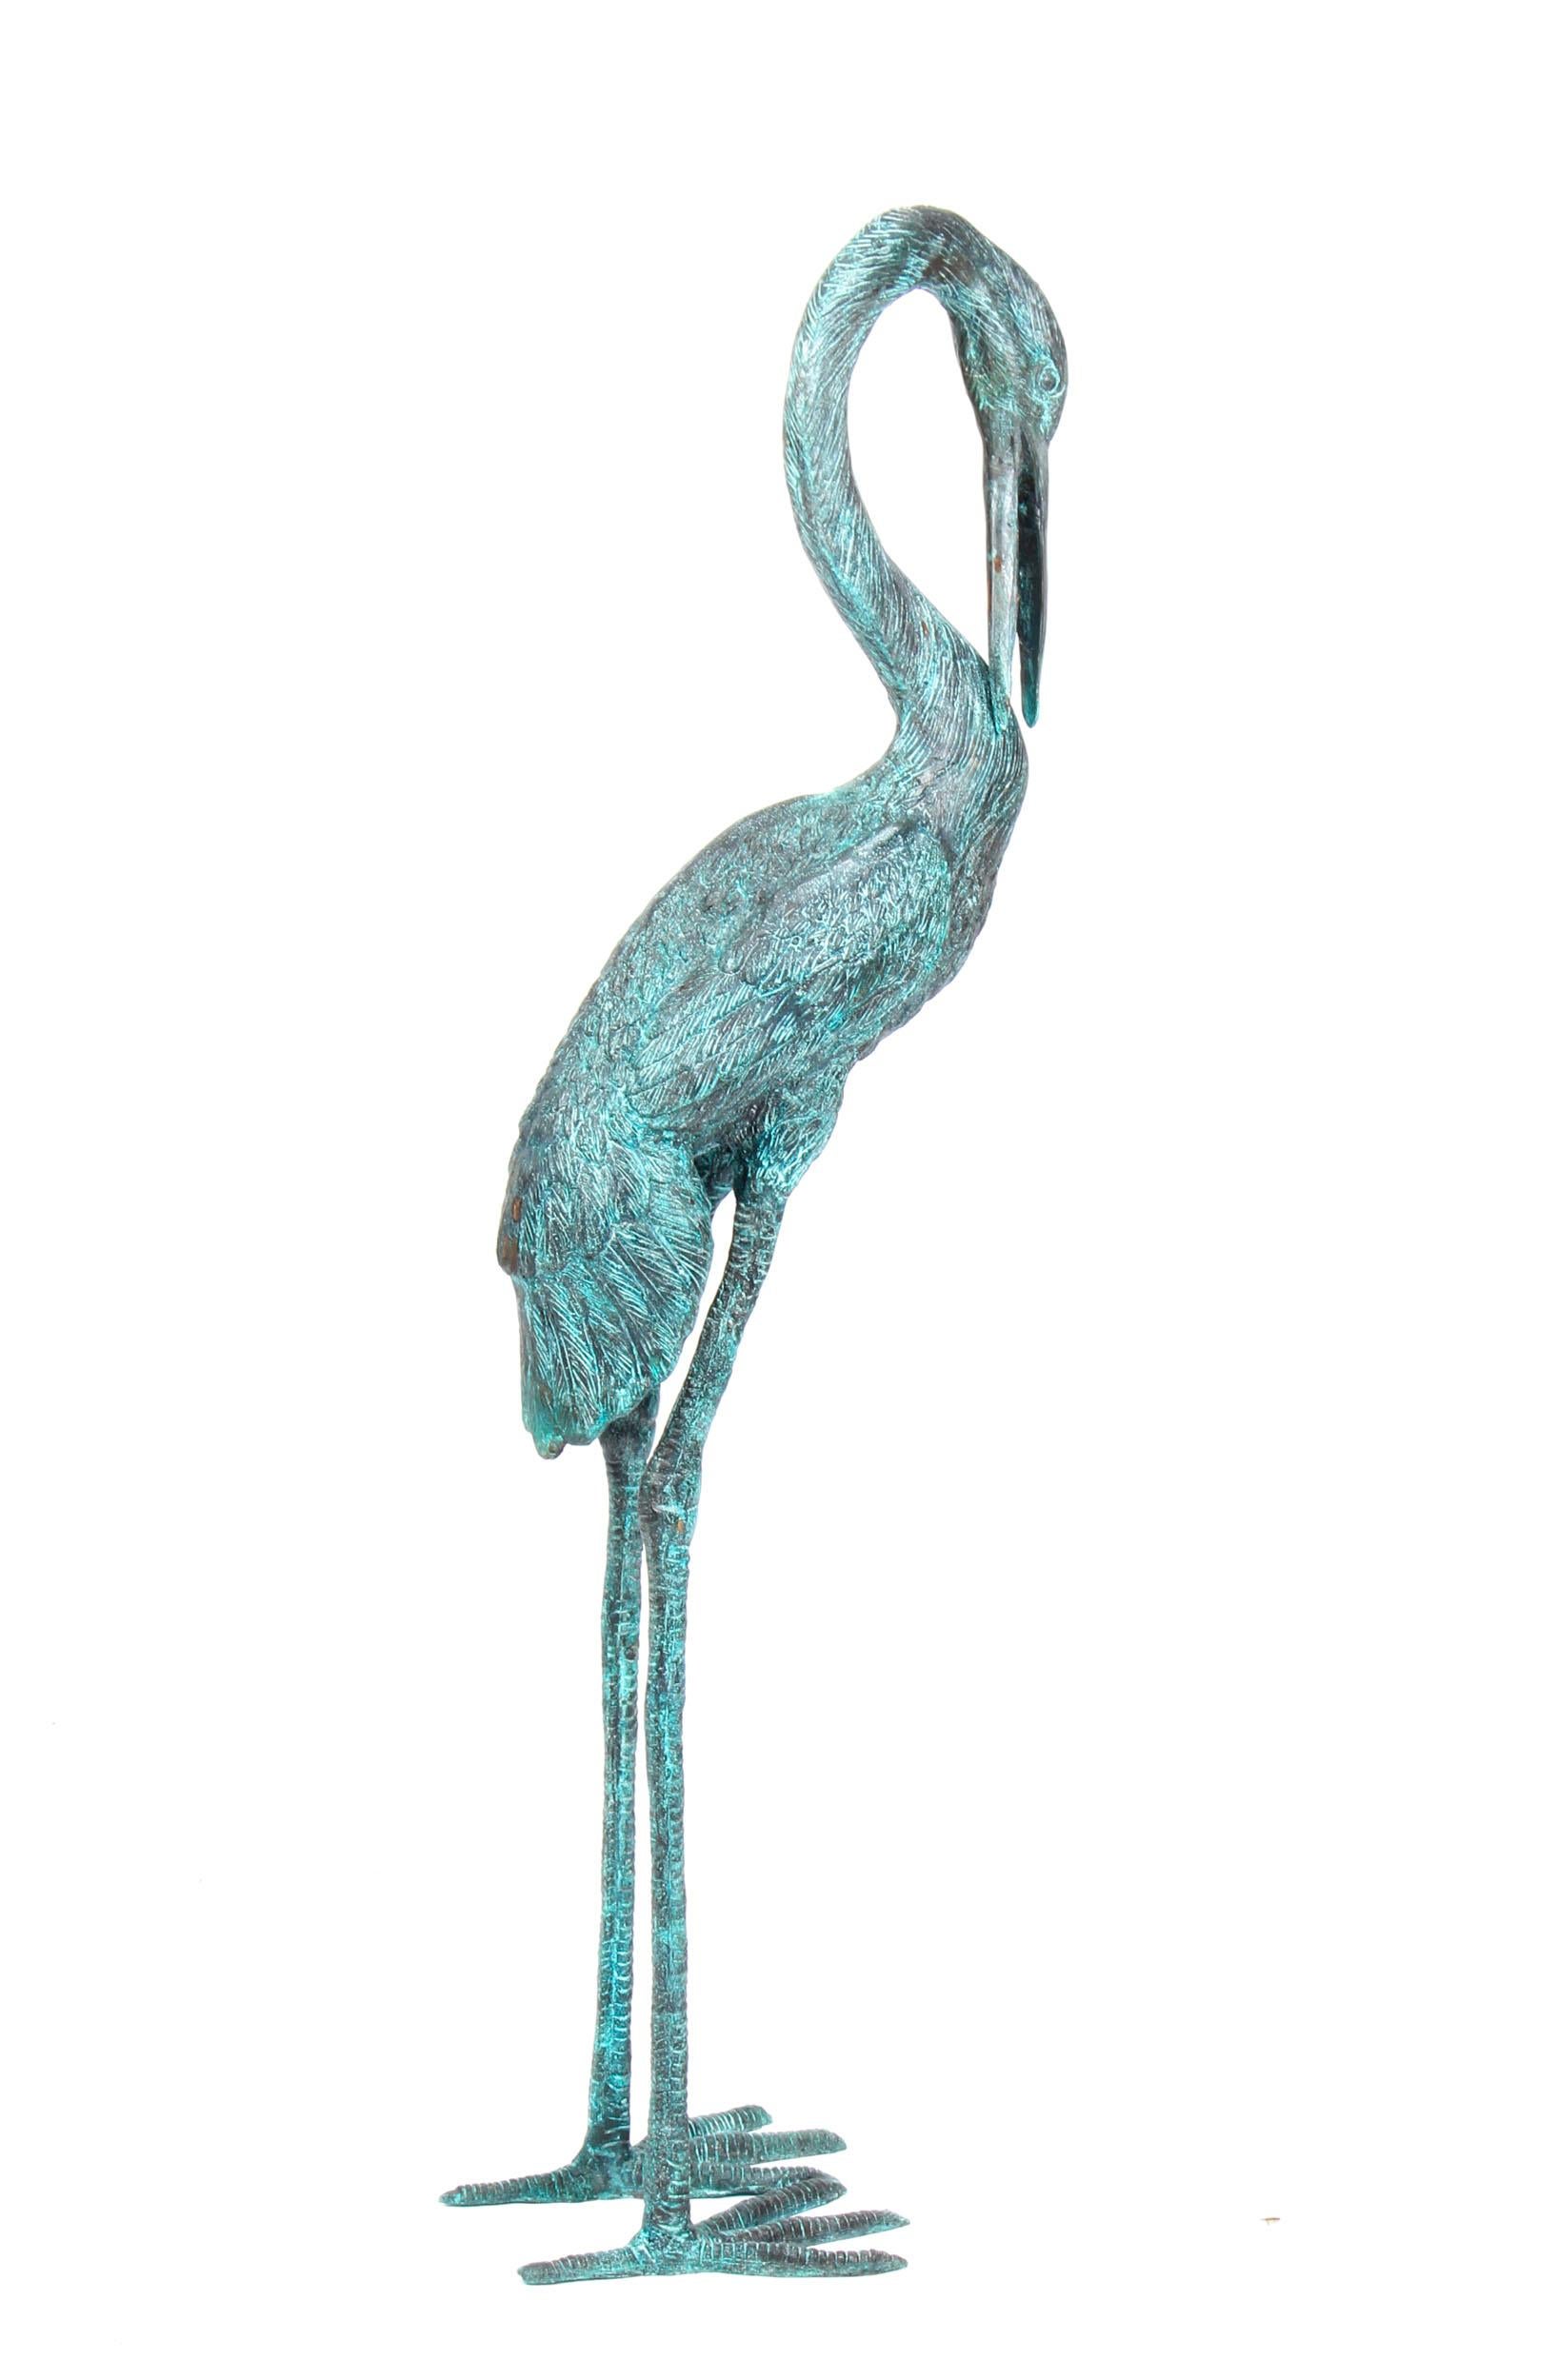 This is a stunning pair of solid bronze cranes with a delightful green patina and dating from the last quarter of the 20th century.

This remarkable bronze pair features the two birds in a highly life-like fashion - with their characteristic long